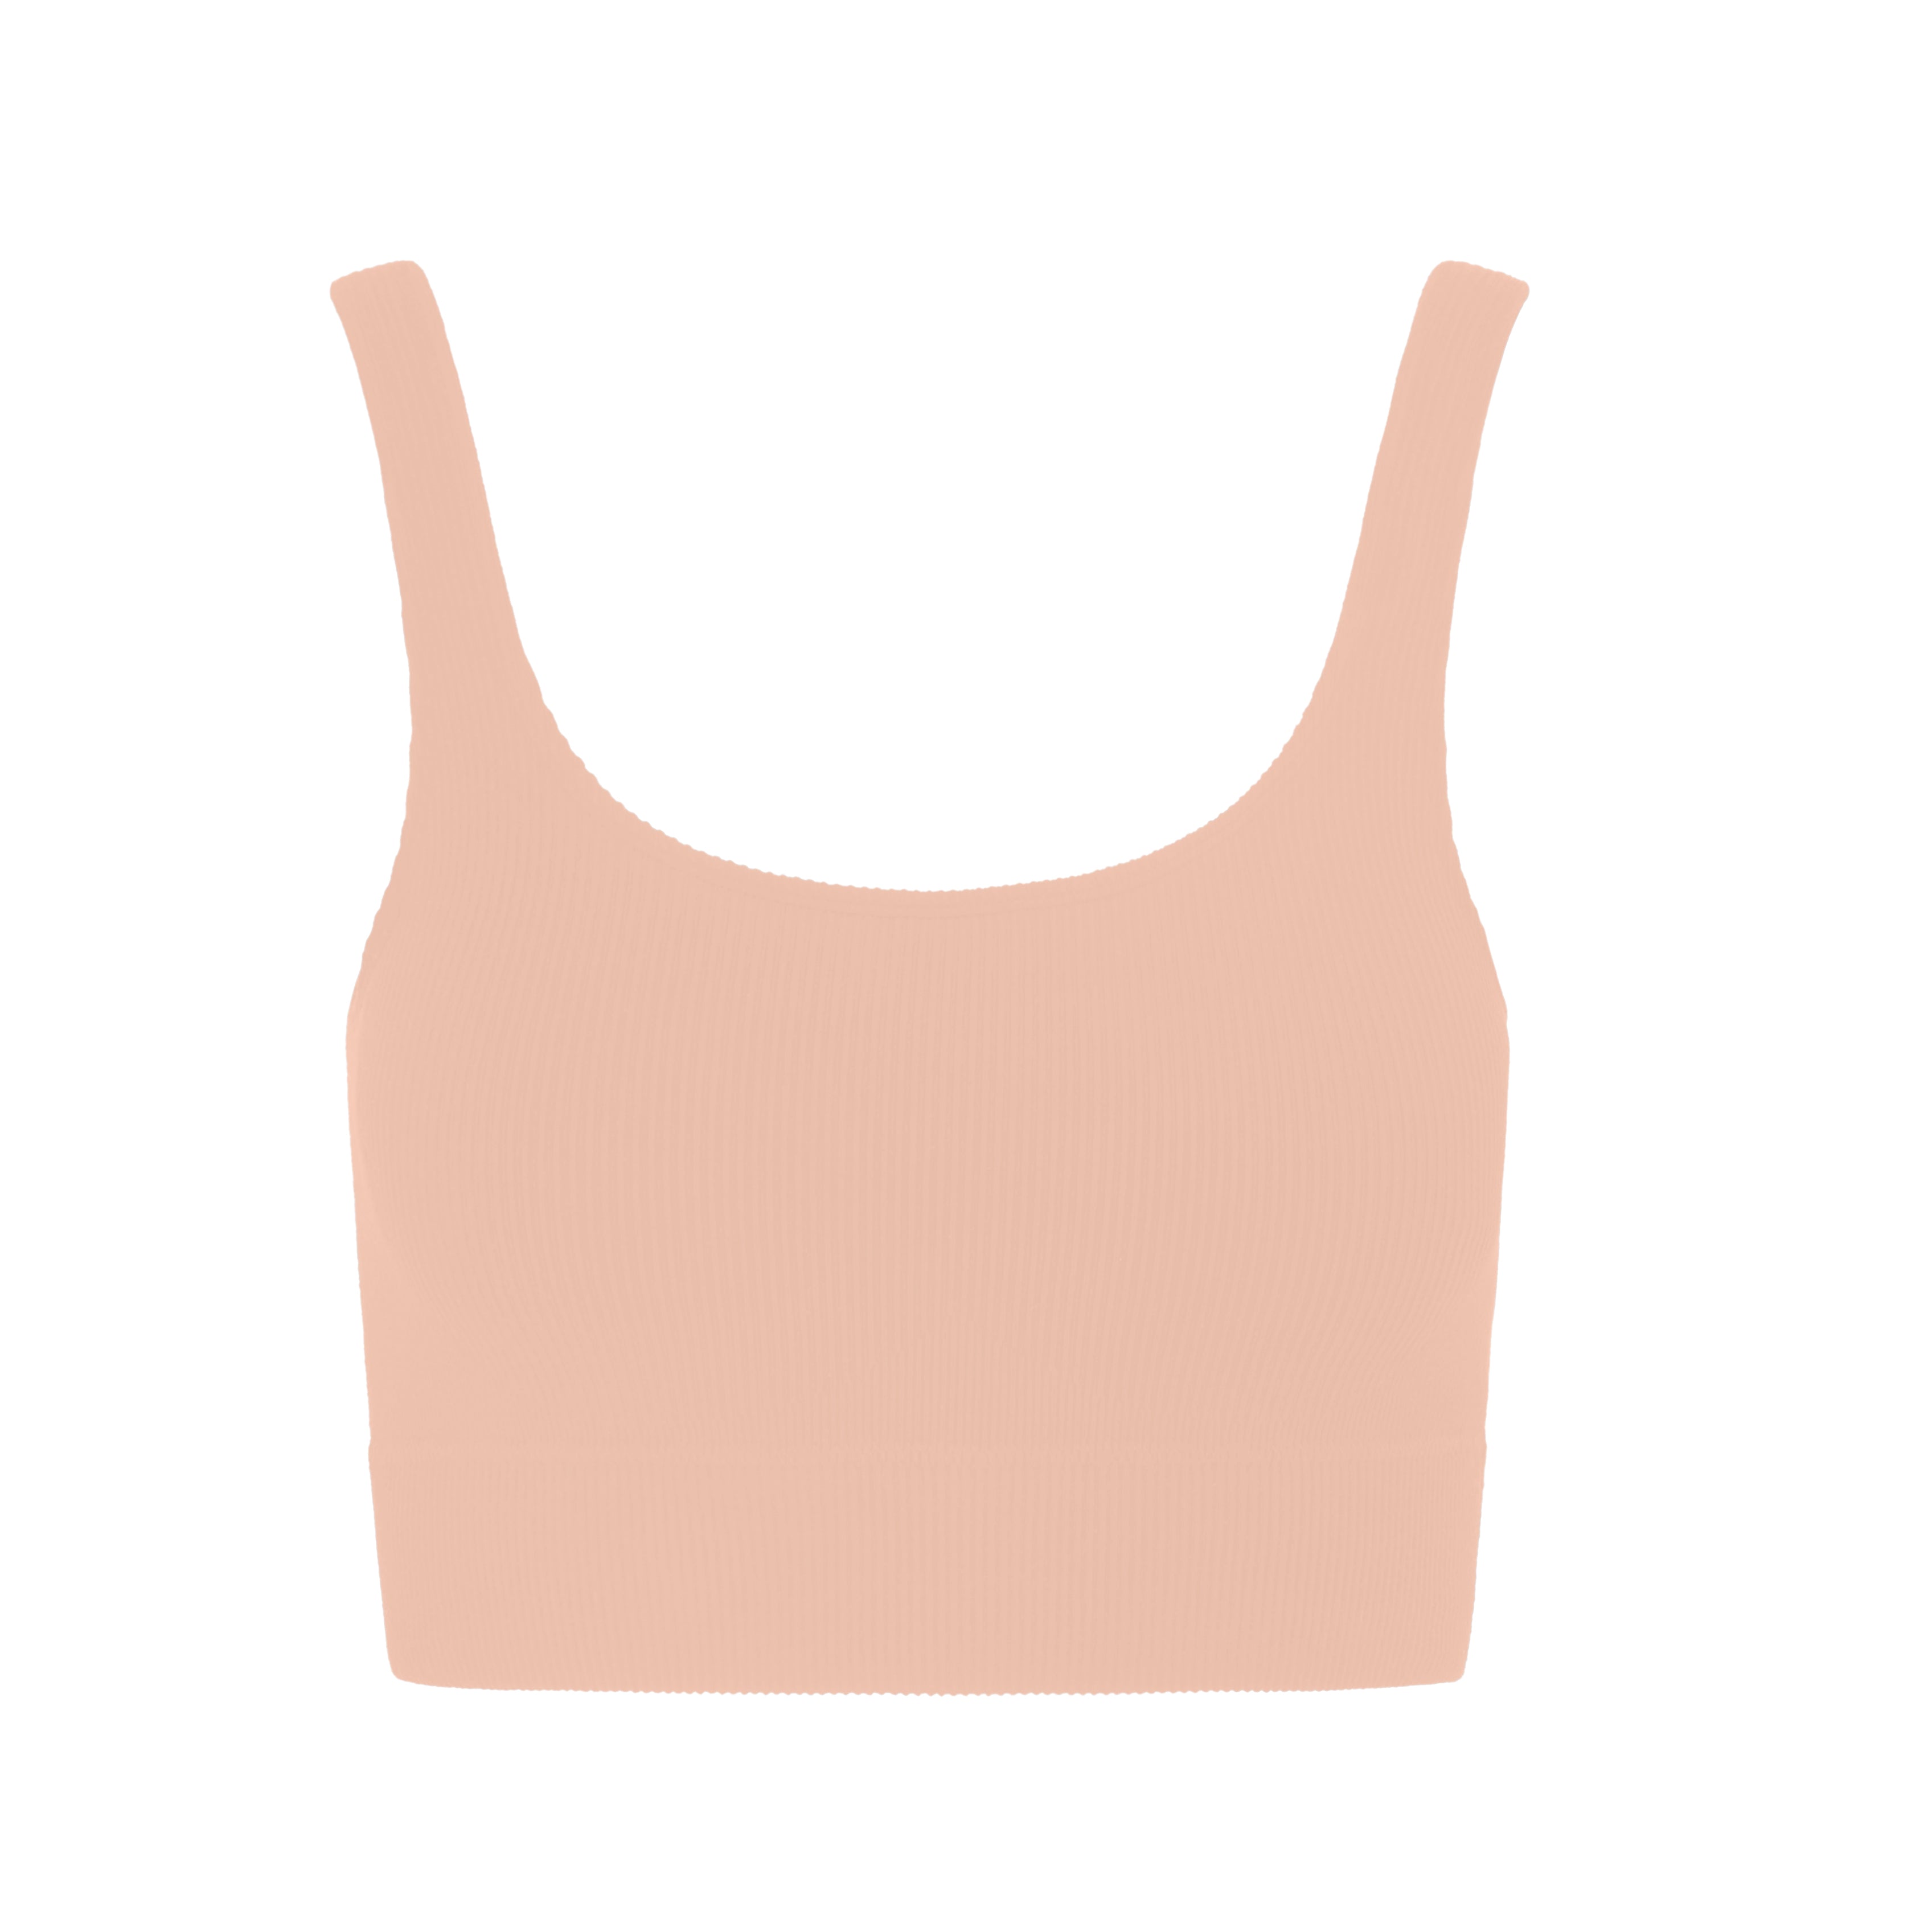 Ada seamless bralette from Six, suitable to wear for  maternity, yoga, bralette, crop top, coloured blush, pink, nude.